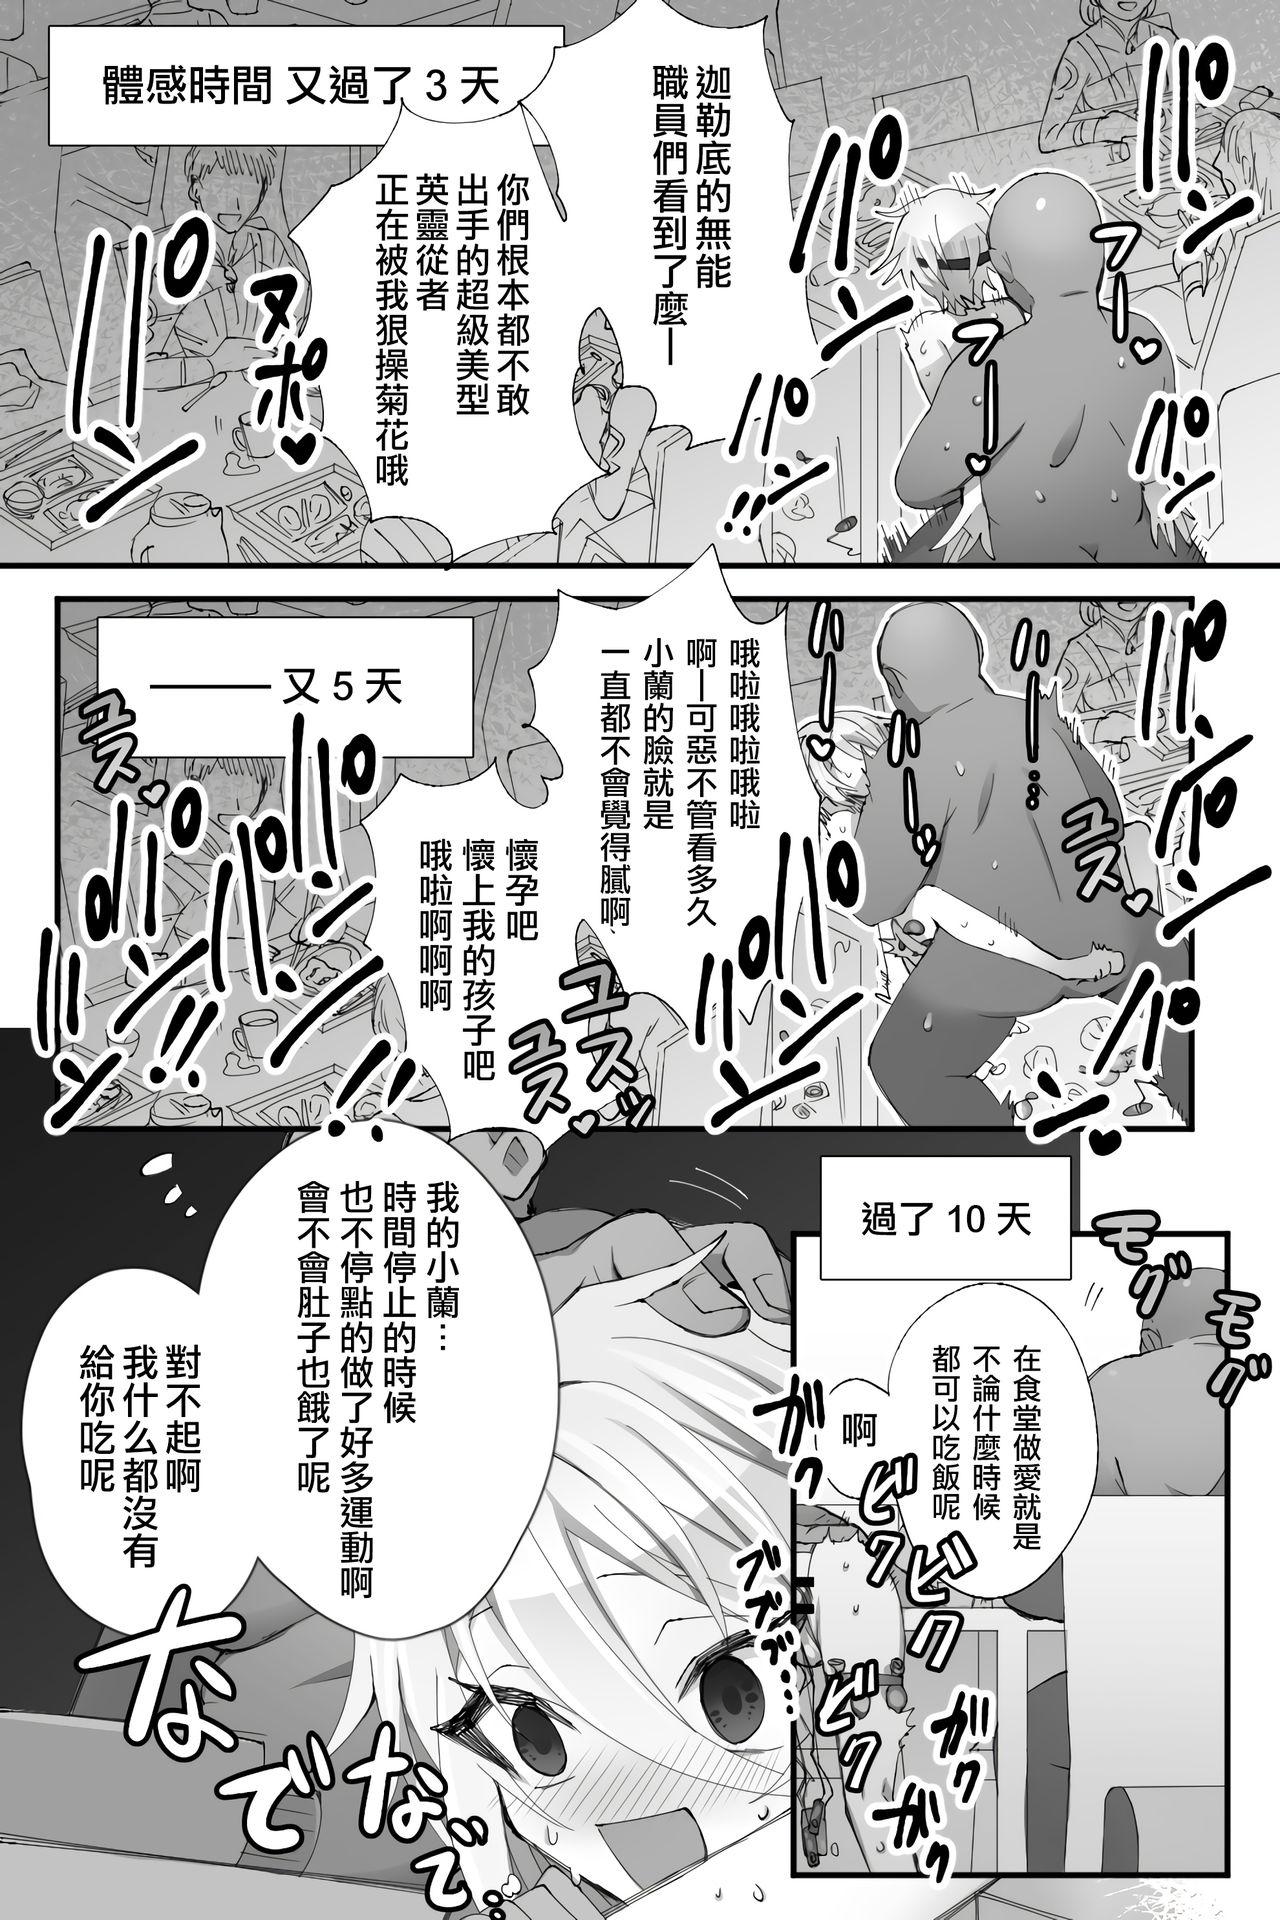 Tokitome in Chaldea | 时间停止IN迦勒底 6